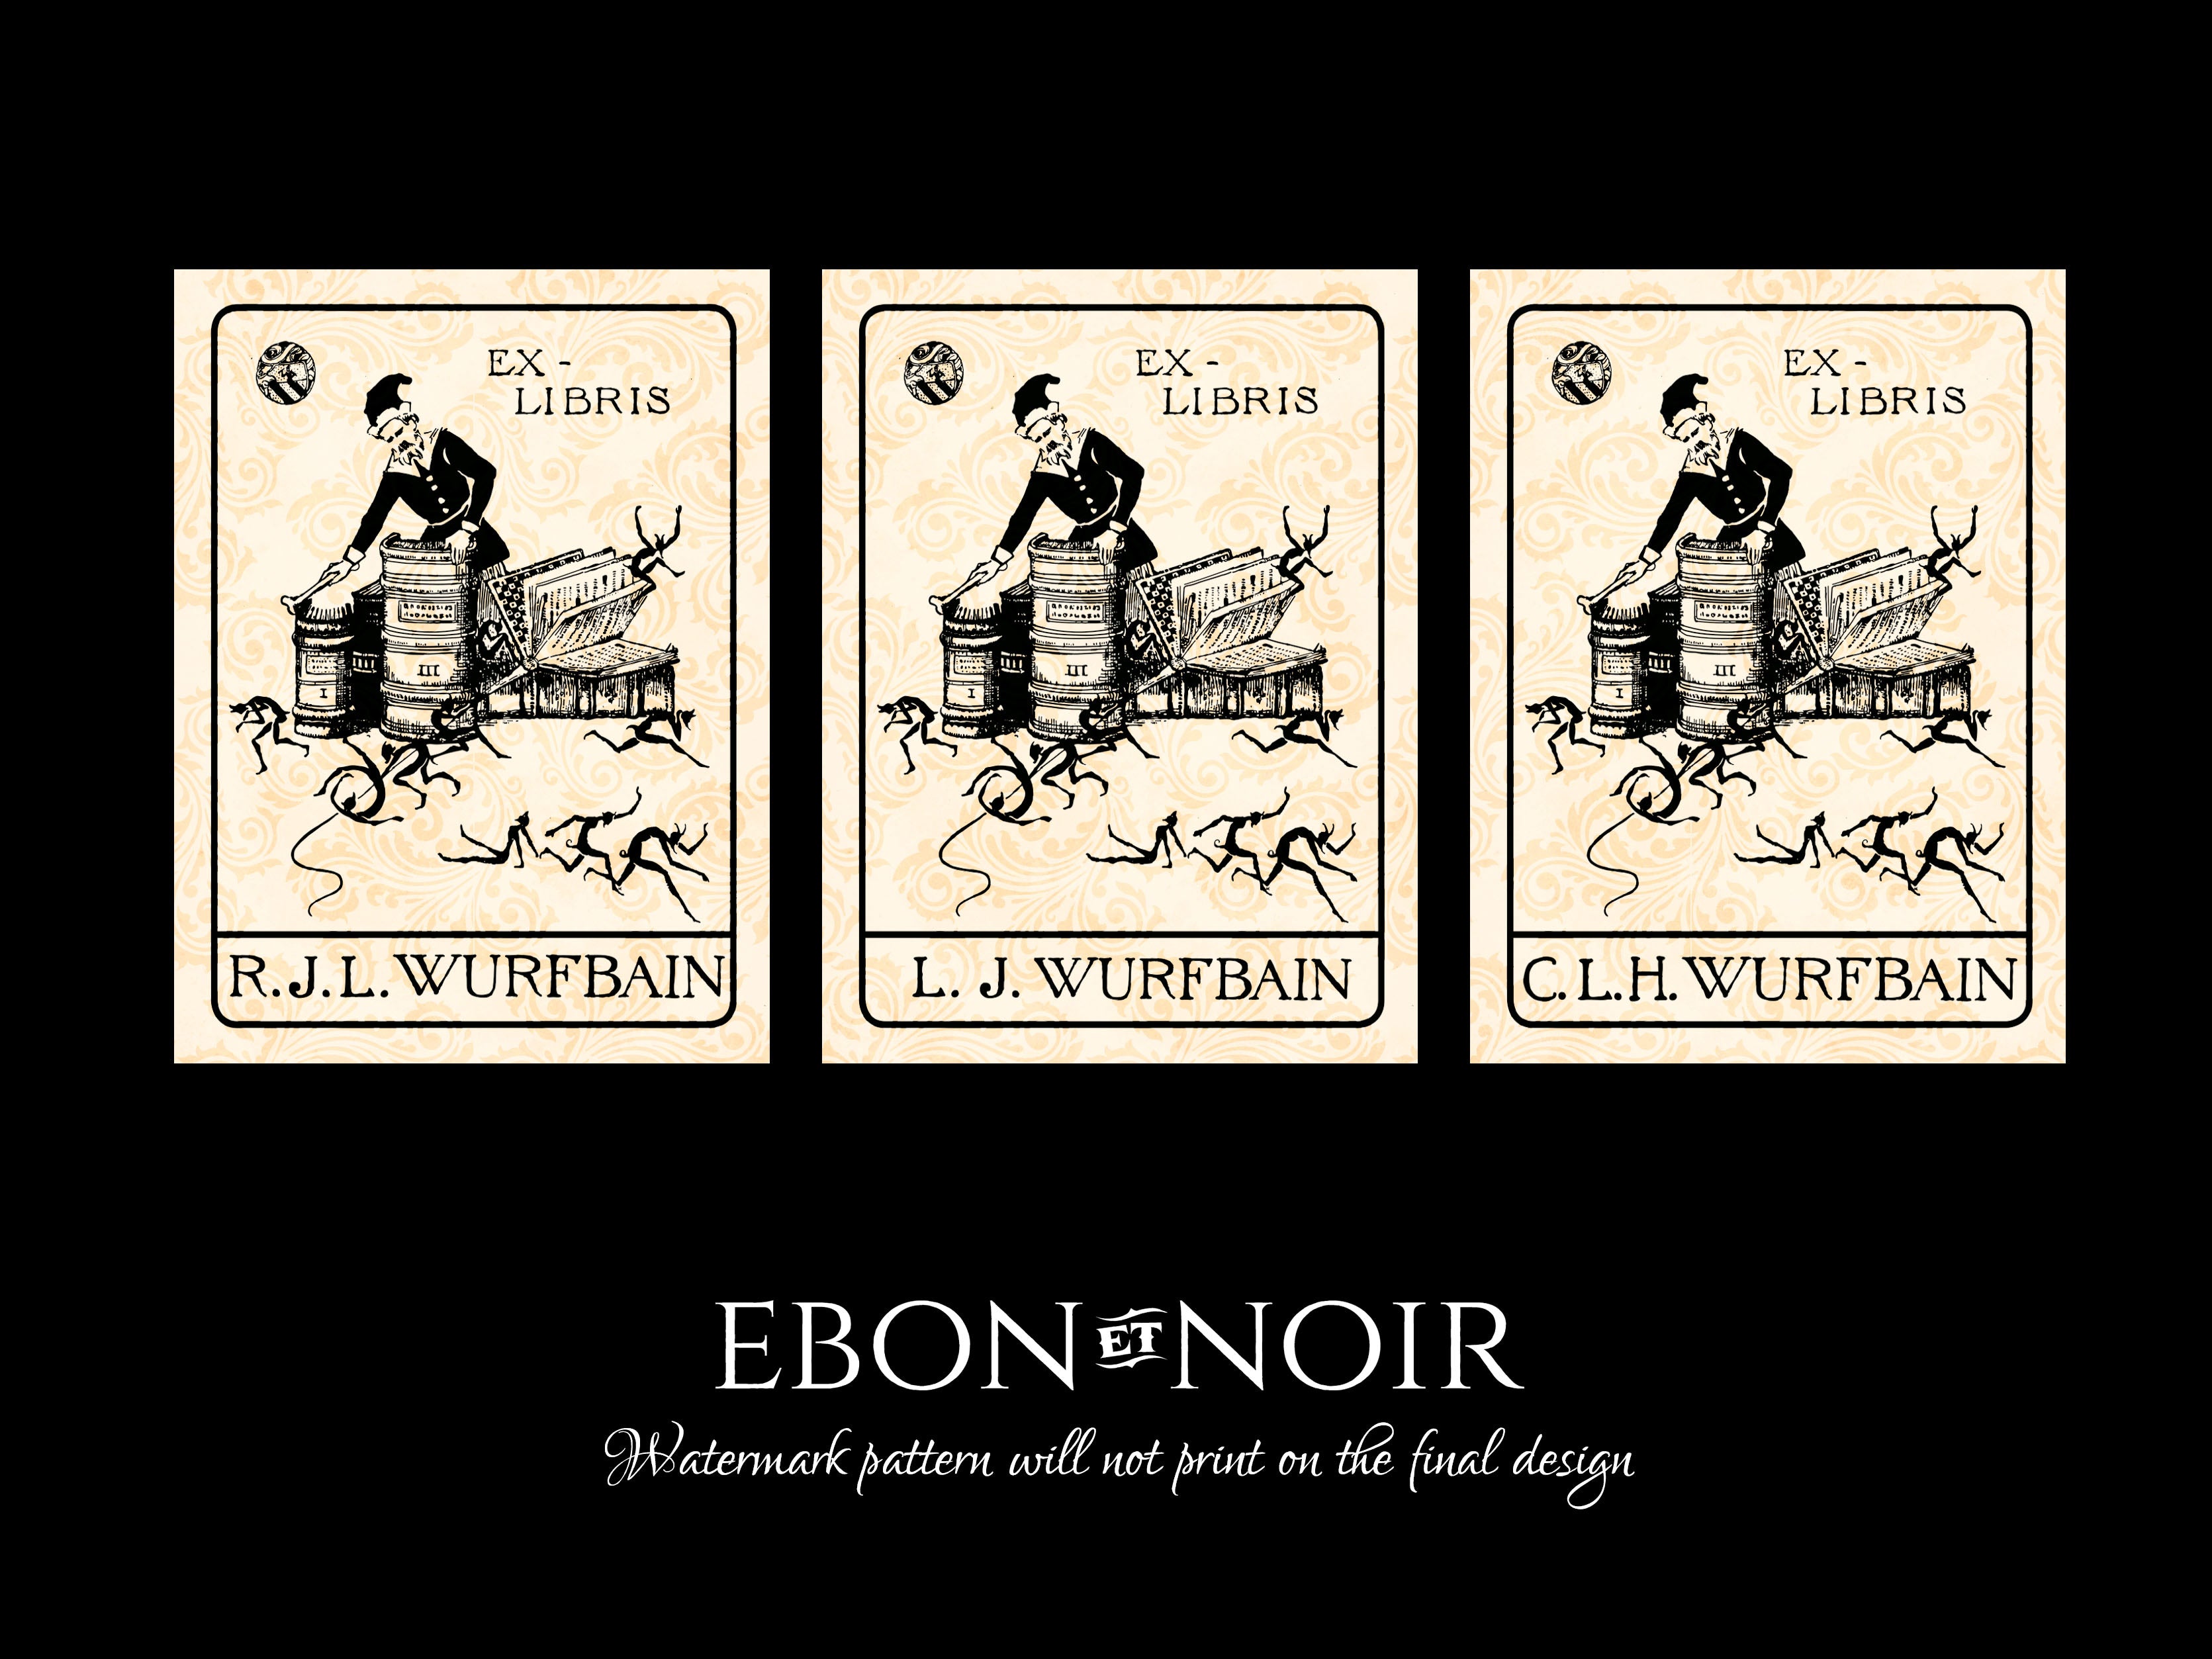 WURFBAIN CUSTOM ORDER, Personalized Ex-Libris Bookplates, Crafted on Traditional Gummed Paper, 4in x 3in, 450 Pieces